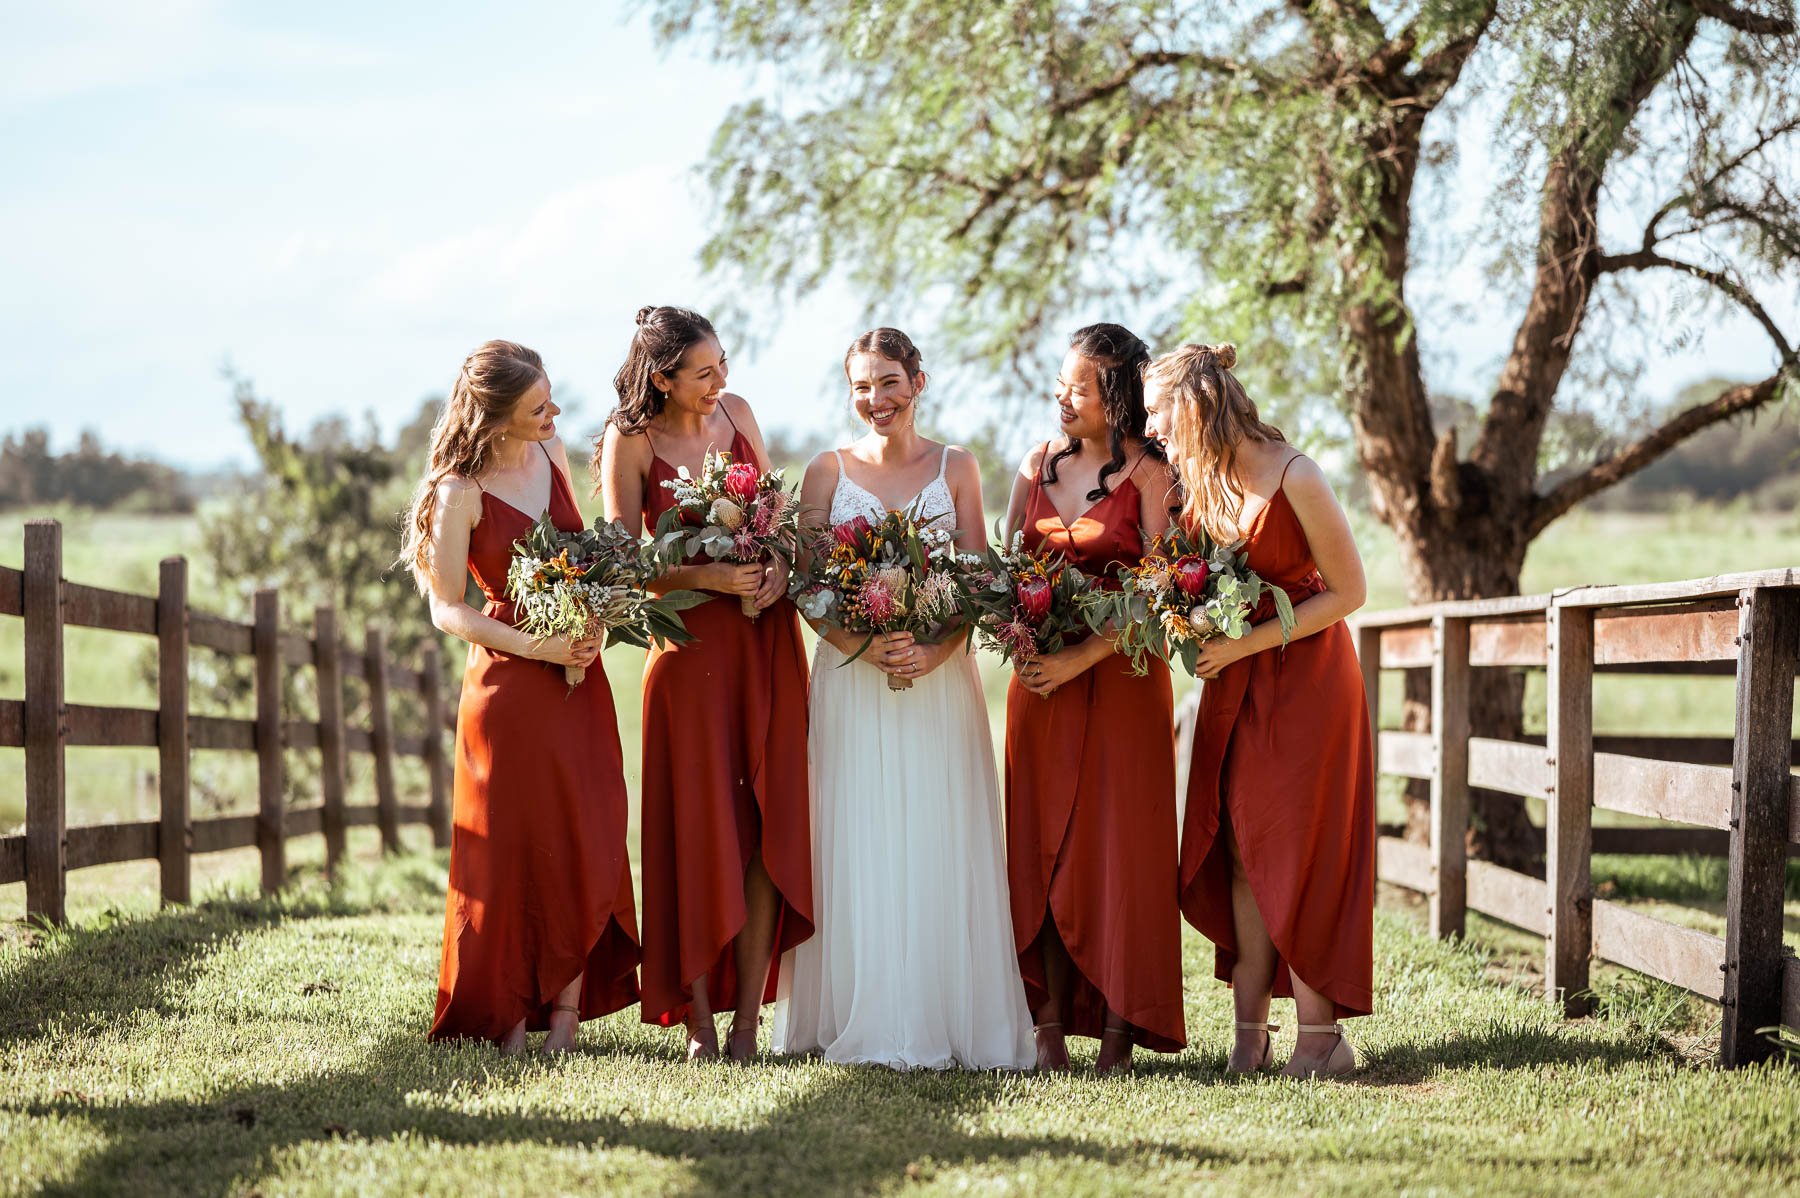 Bridal party photos at an outdoor wedding in sydney taken by a sydney wedding photographer